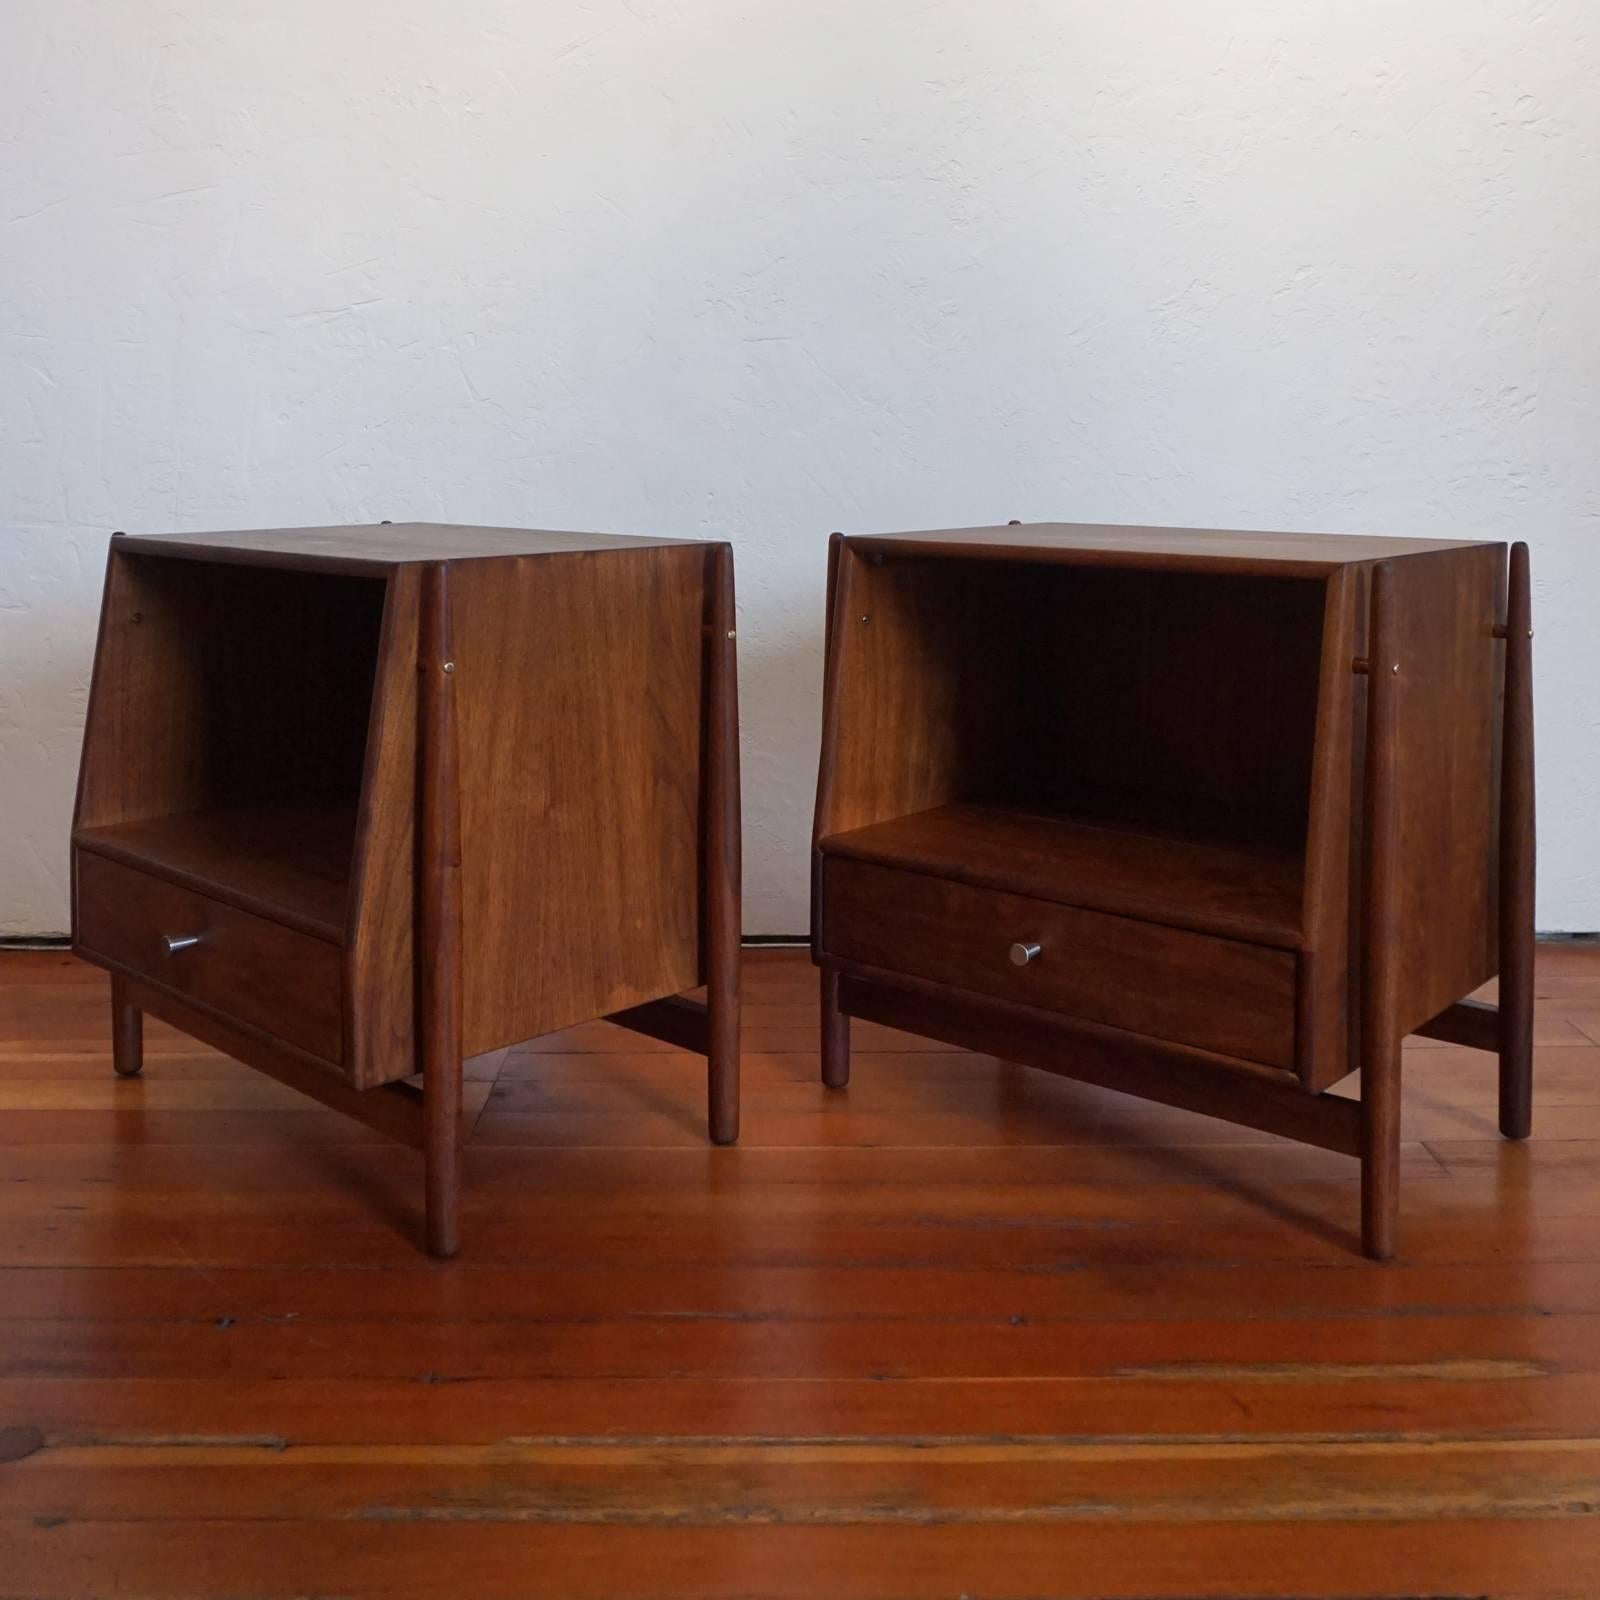 A pair of walnut nightstands by Kipp Stewart and Stewart MacDougall for Drexel. Floating cabinets with brass accents. Each drawer has a removable interior divider. Refinished.